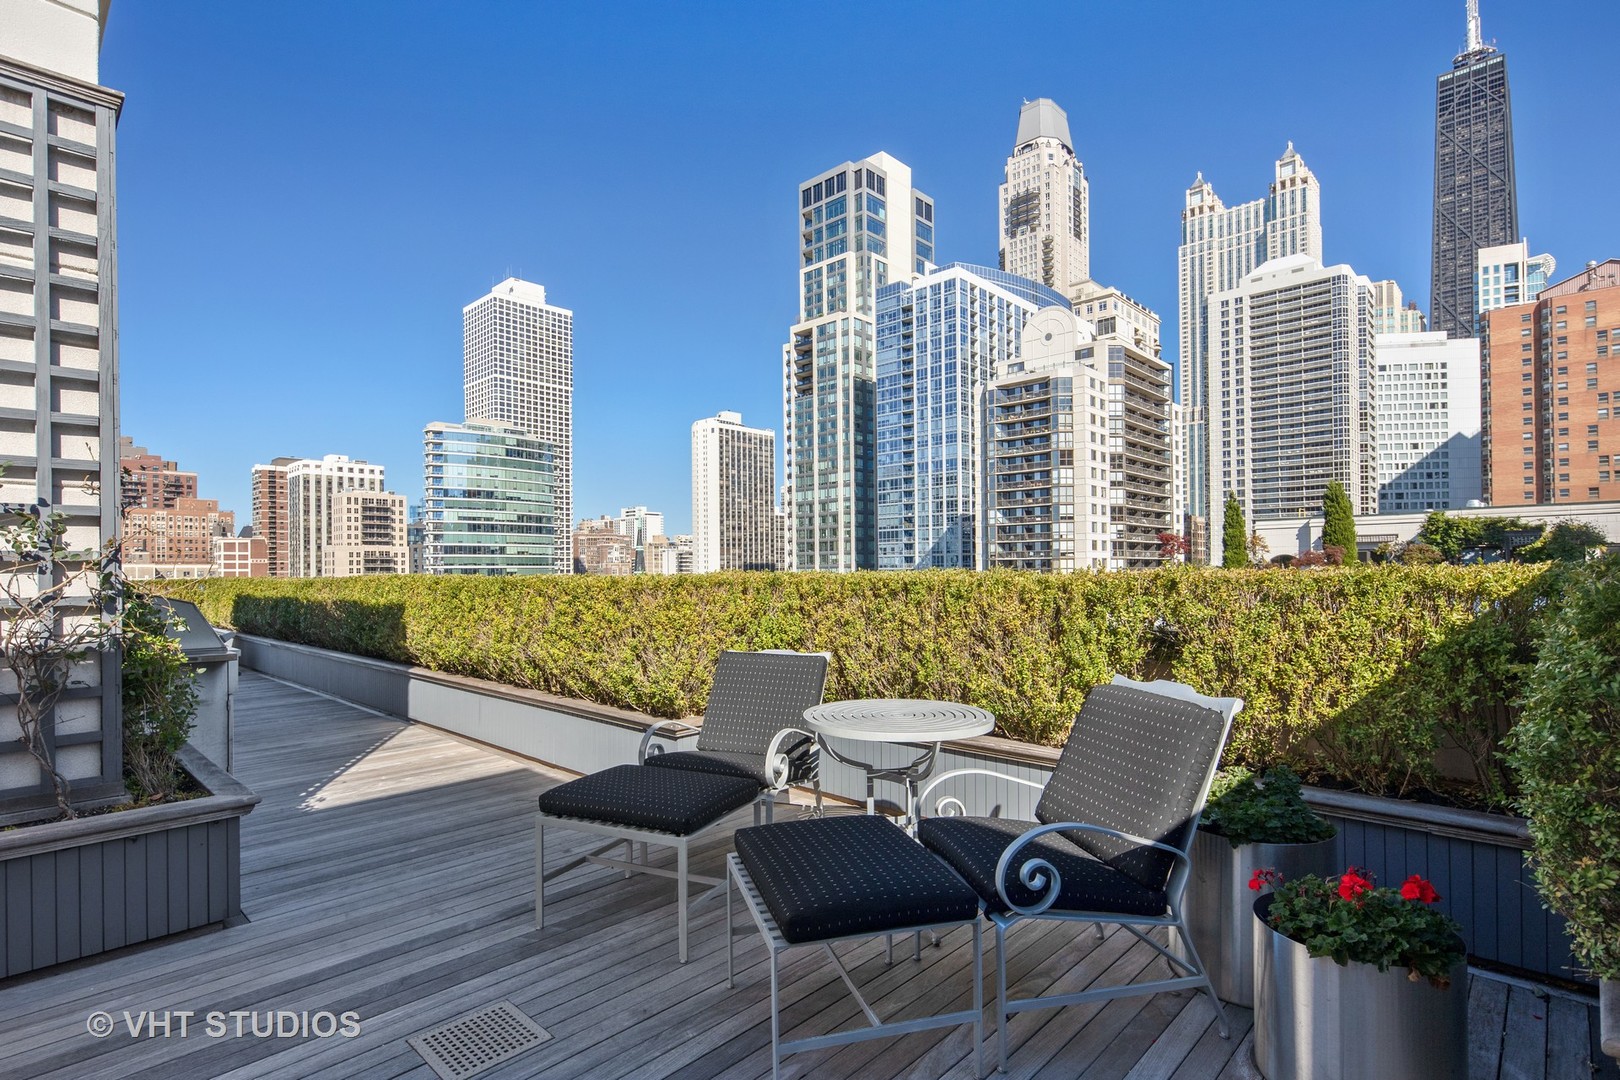 For Sale 55 W Delaware Place 1120 Chicago Il 60610 4 Beds 5 Full Baths 1 Half Bath 2 950 000